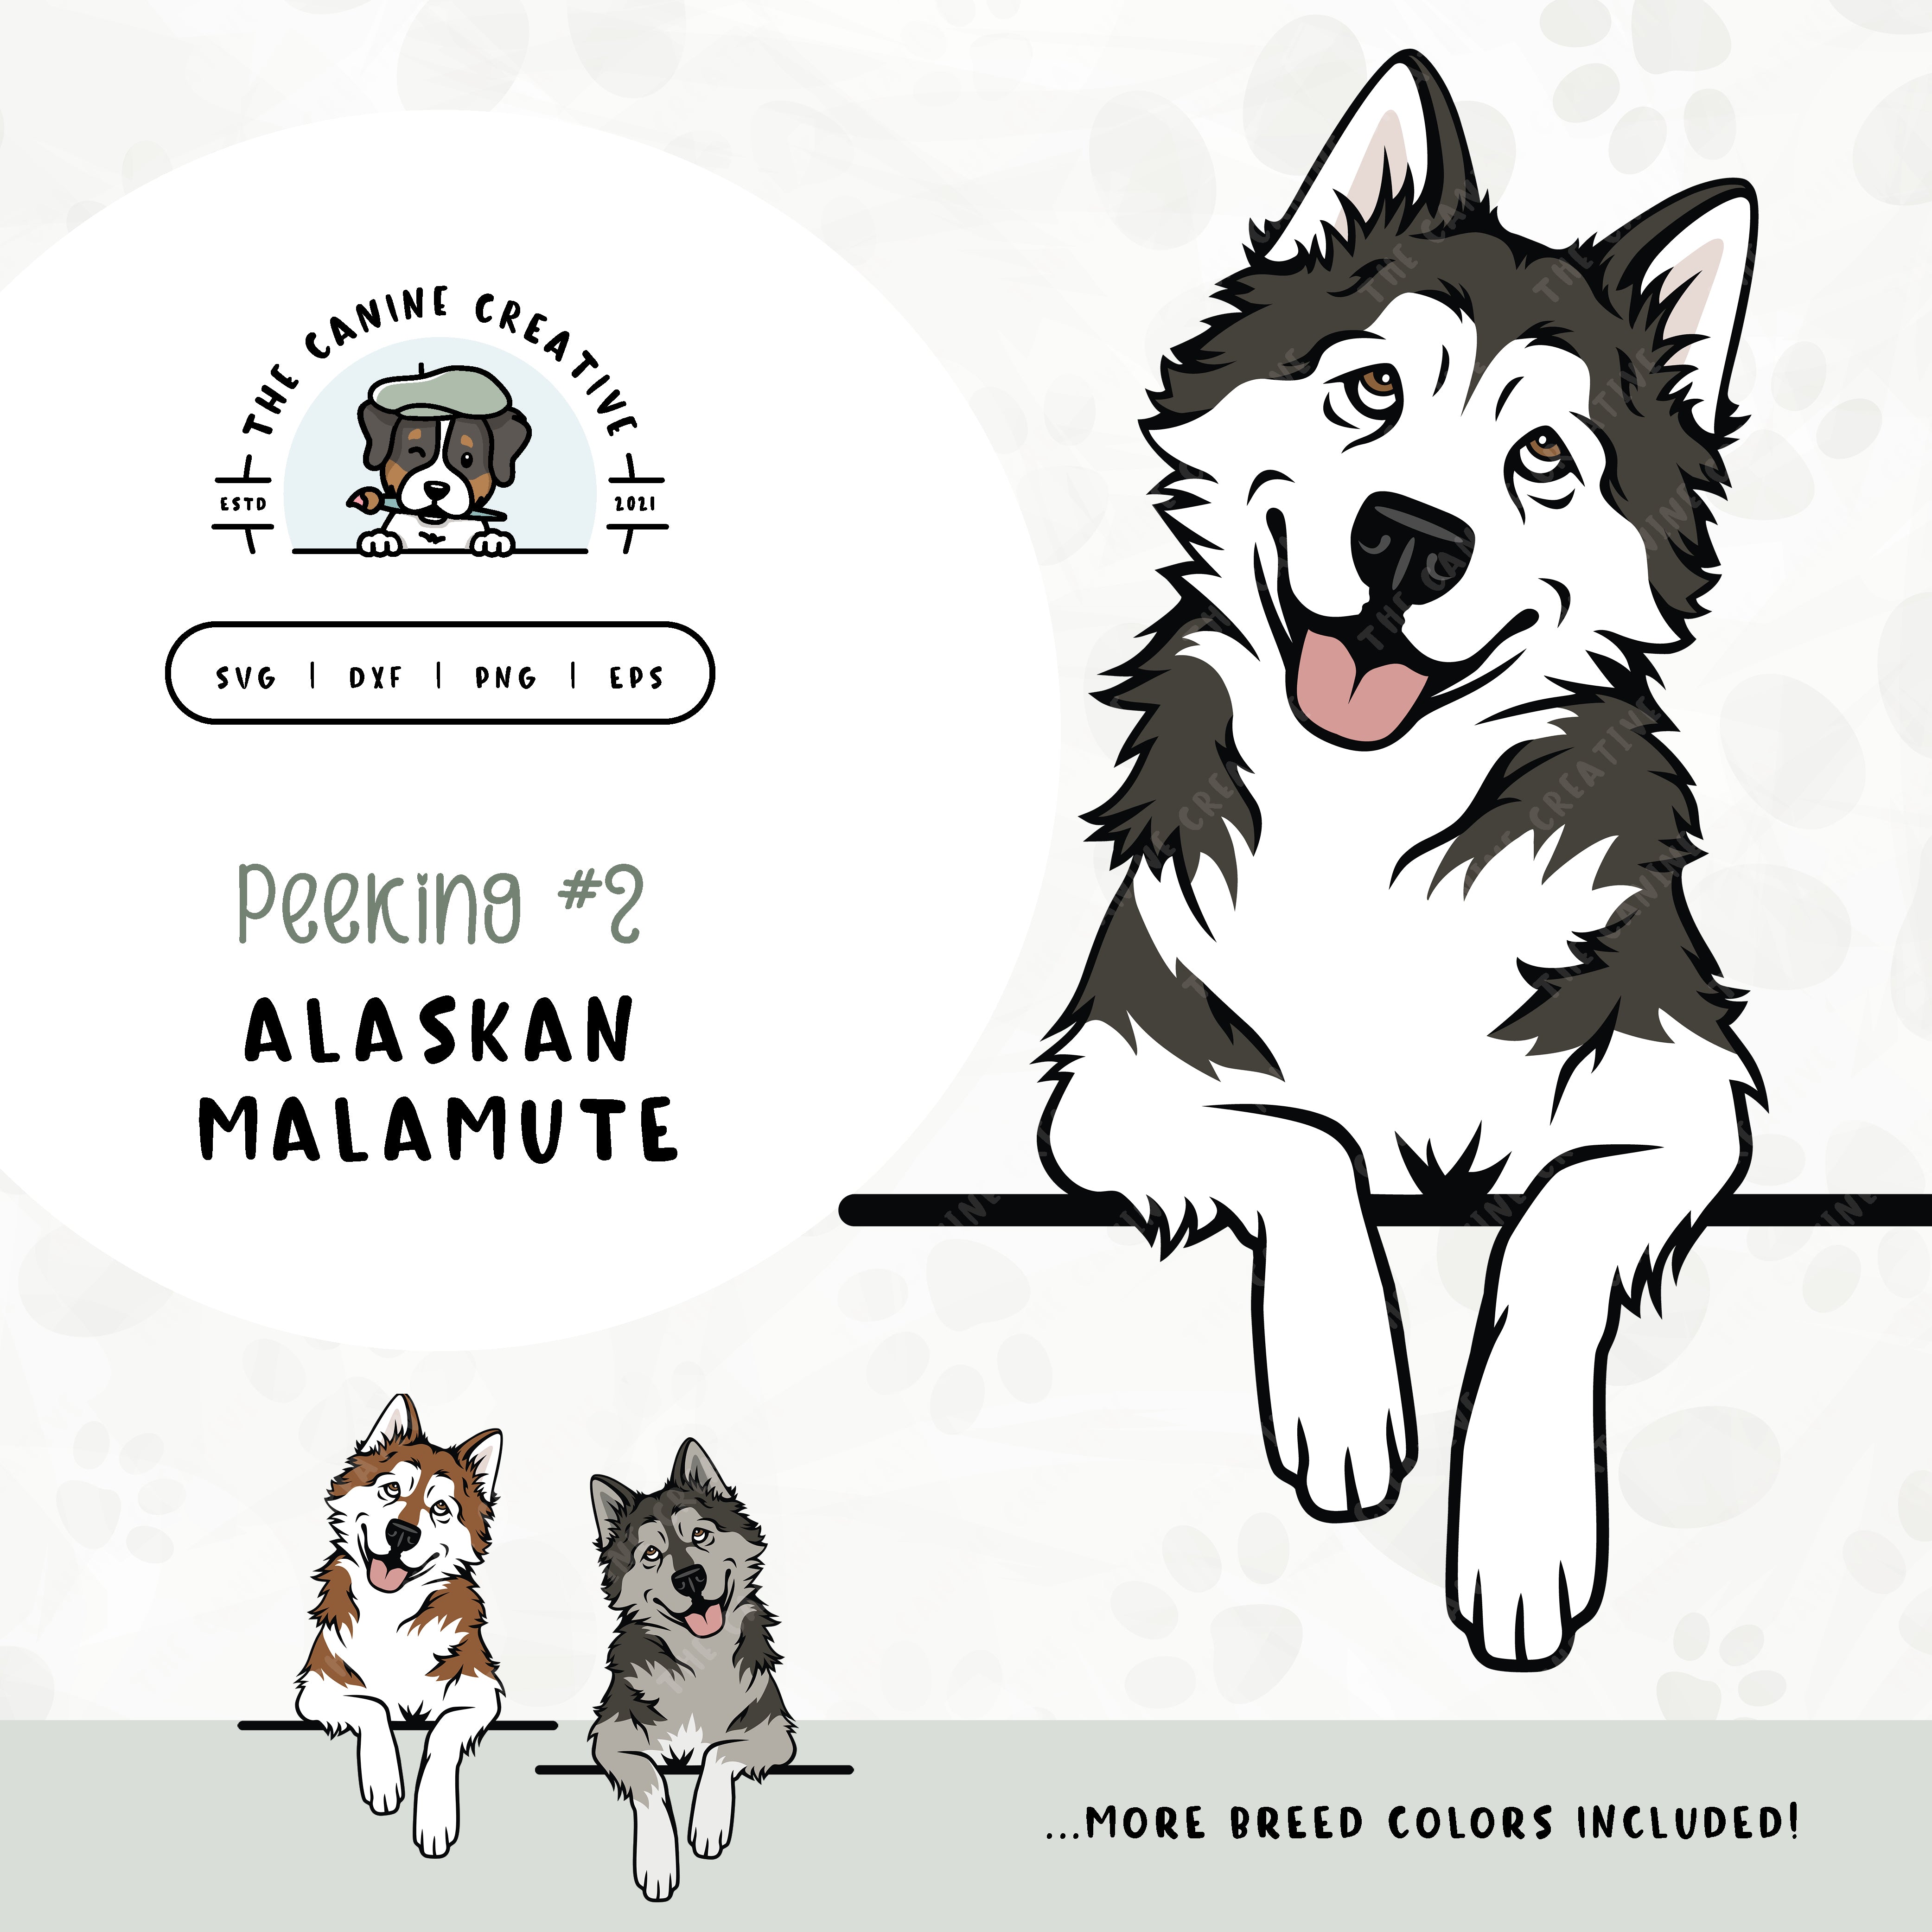 This illustrated design features a peeking Alaskan Malamute. File formats include: SVG, DXF, PNG, and EPS.